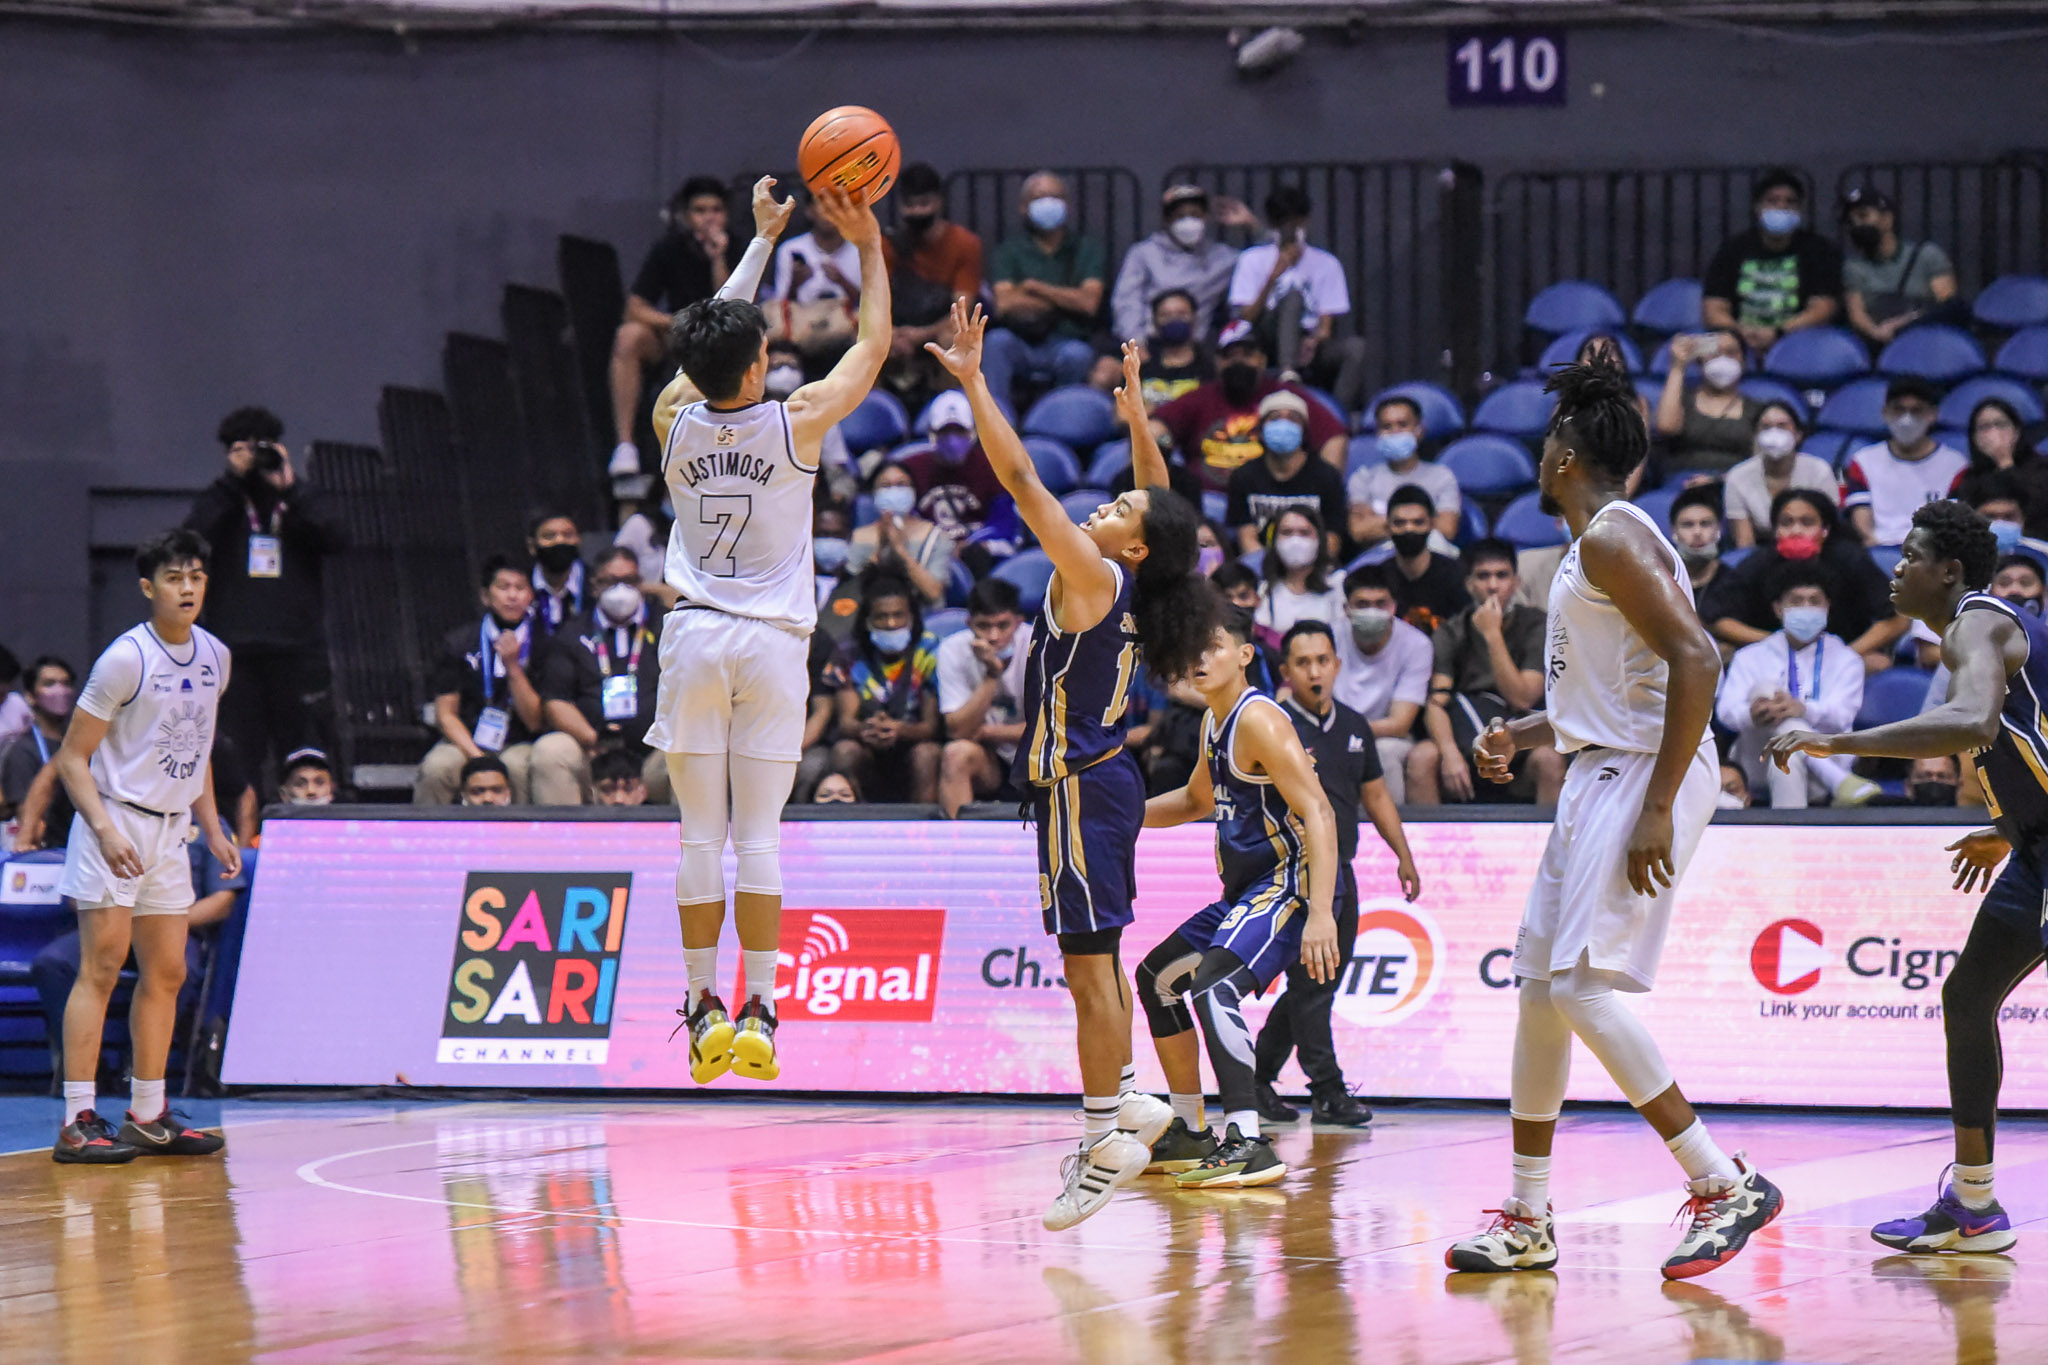 UAAP-85-MBB-NU-vs.-ADU-Jerom-Lastimosa-7507 Jerom Lastimosa had no doubt with game-winner as he practices it 'every morning, lunch, dinner' AdU Basketball News UAAP  - philippine sports news